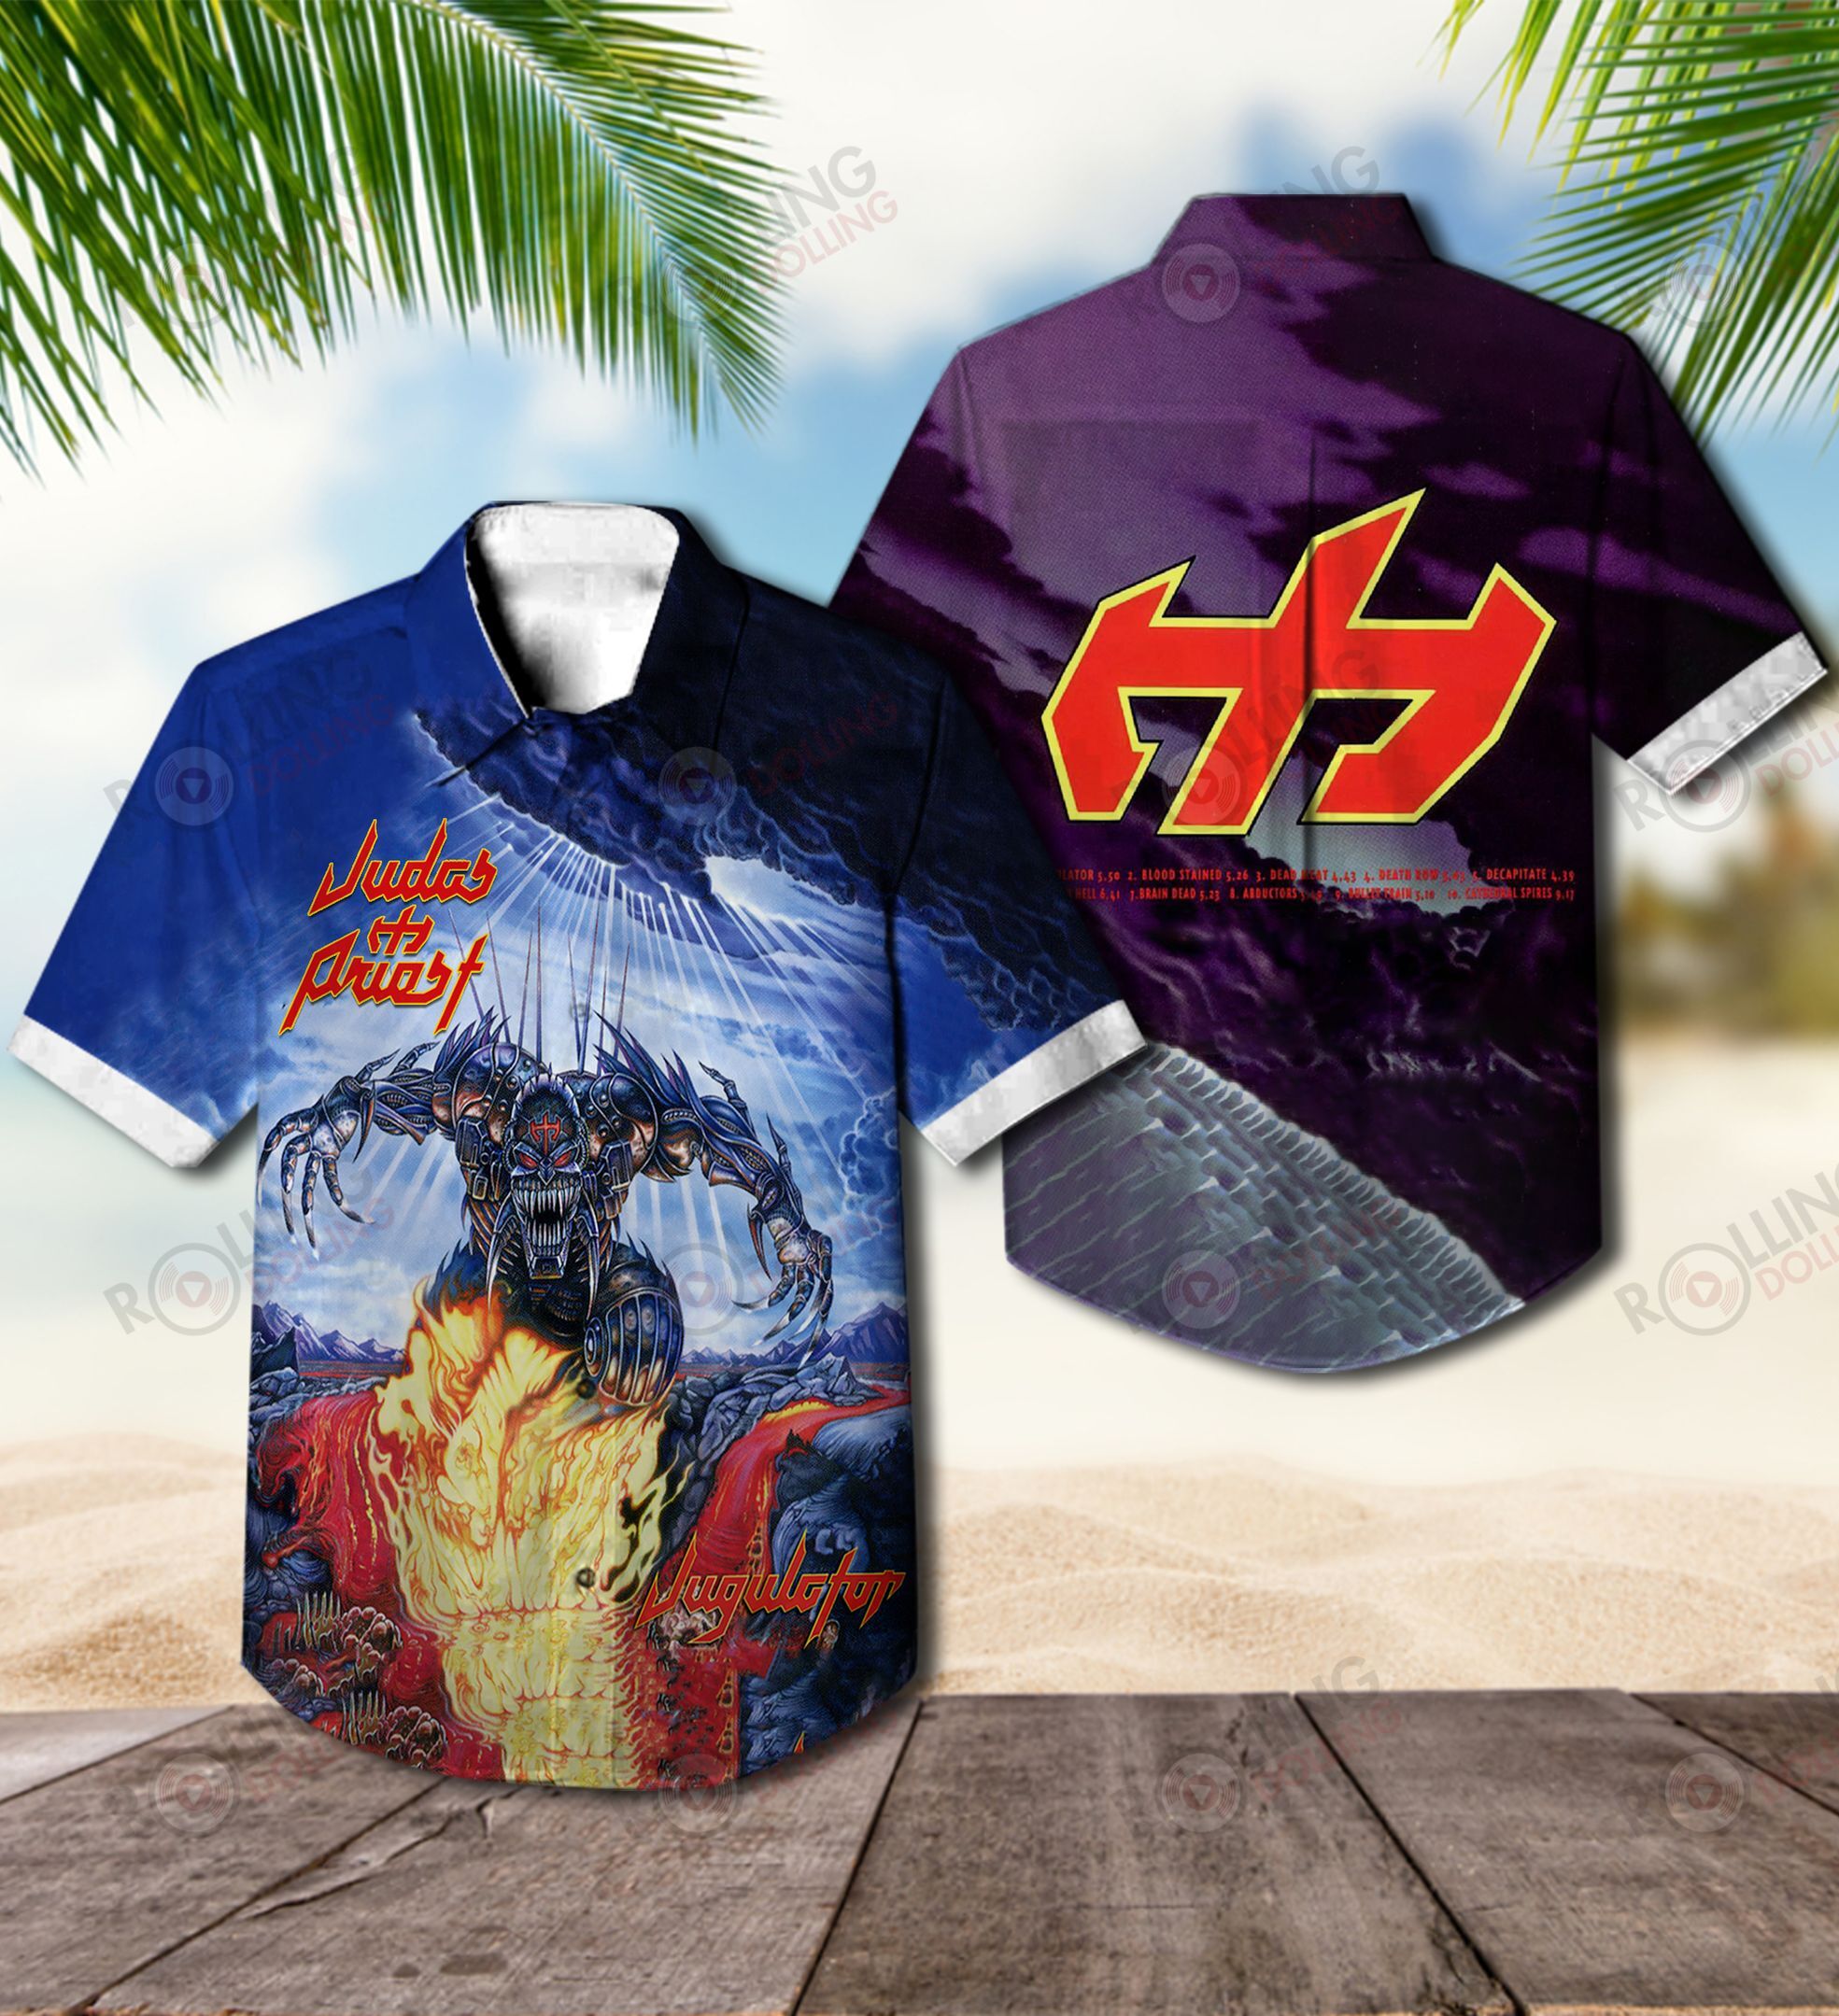 Check out these top 100+ Hawaiian shirt so cool for rock fans 261